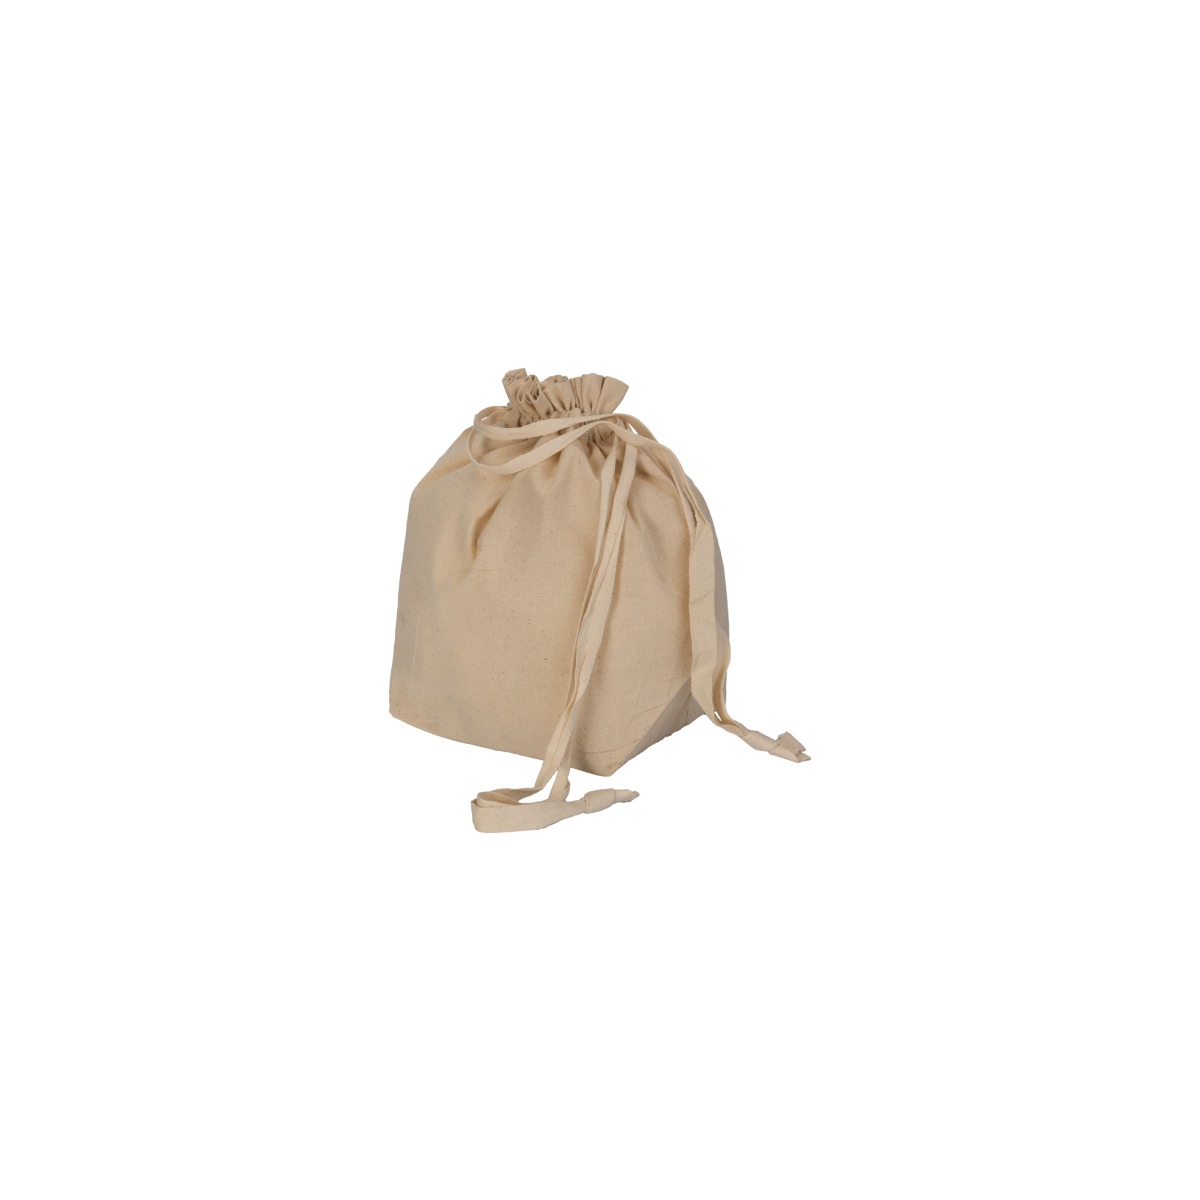 Cotton Bottom Gusset Heavyweight Bag with Drawstring